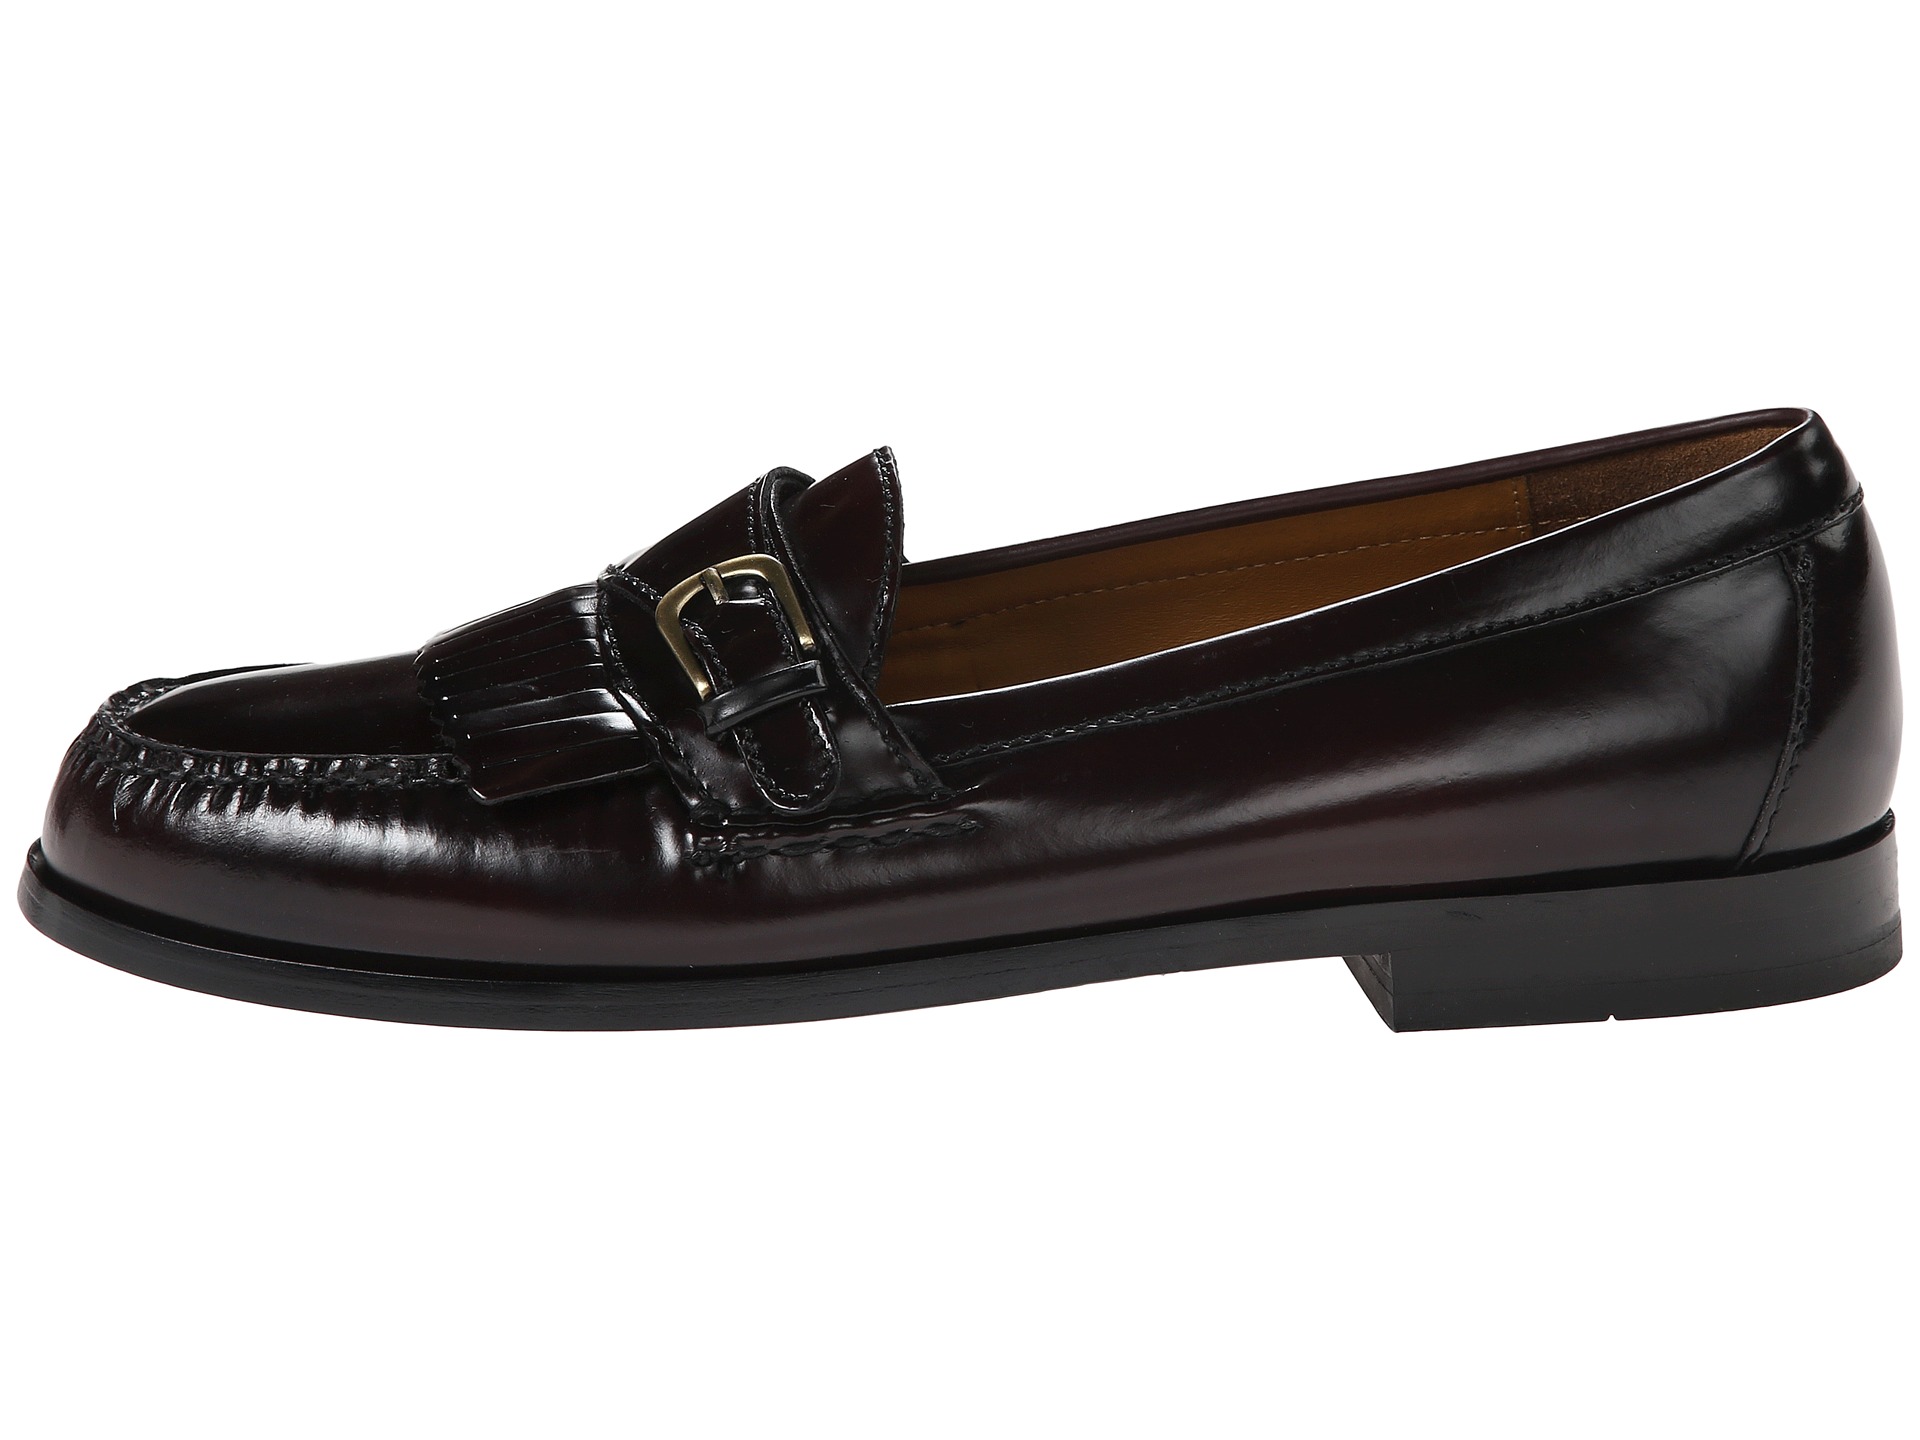 Cole Haan Pinch Buckle Black - Zappos.com Free Shipping BOTH Ways